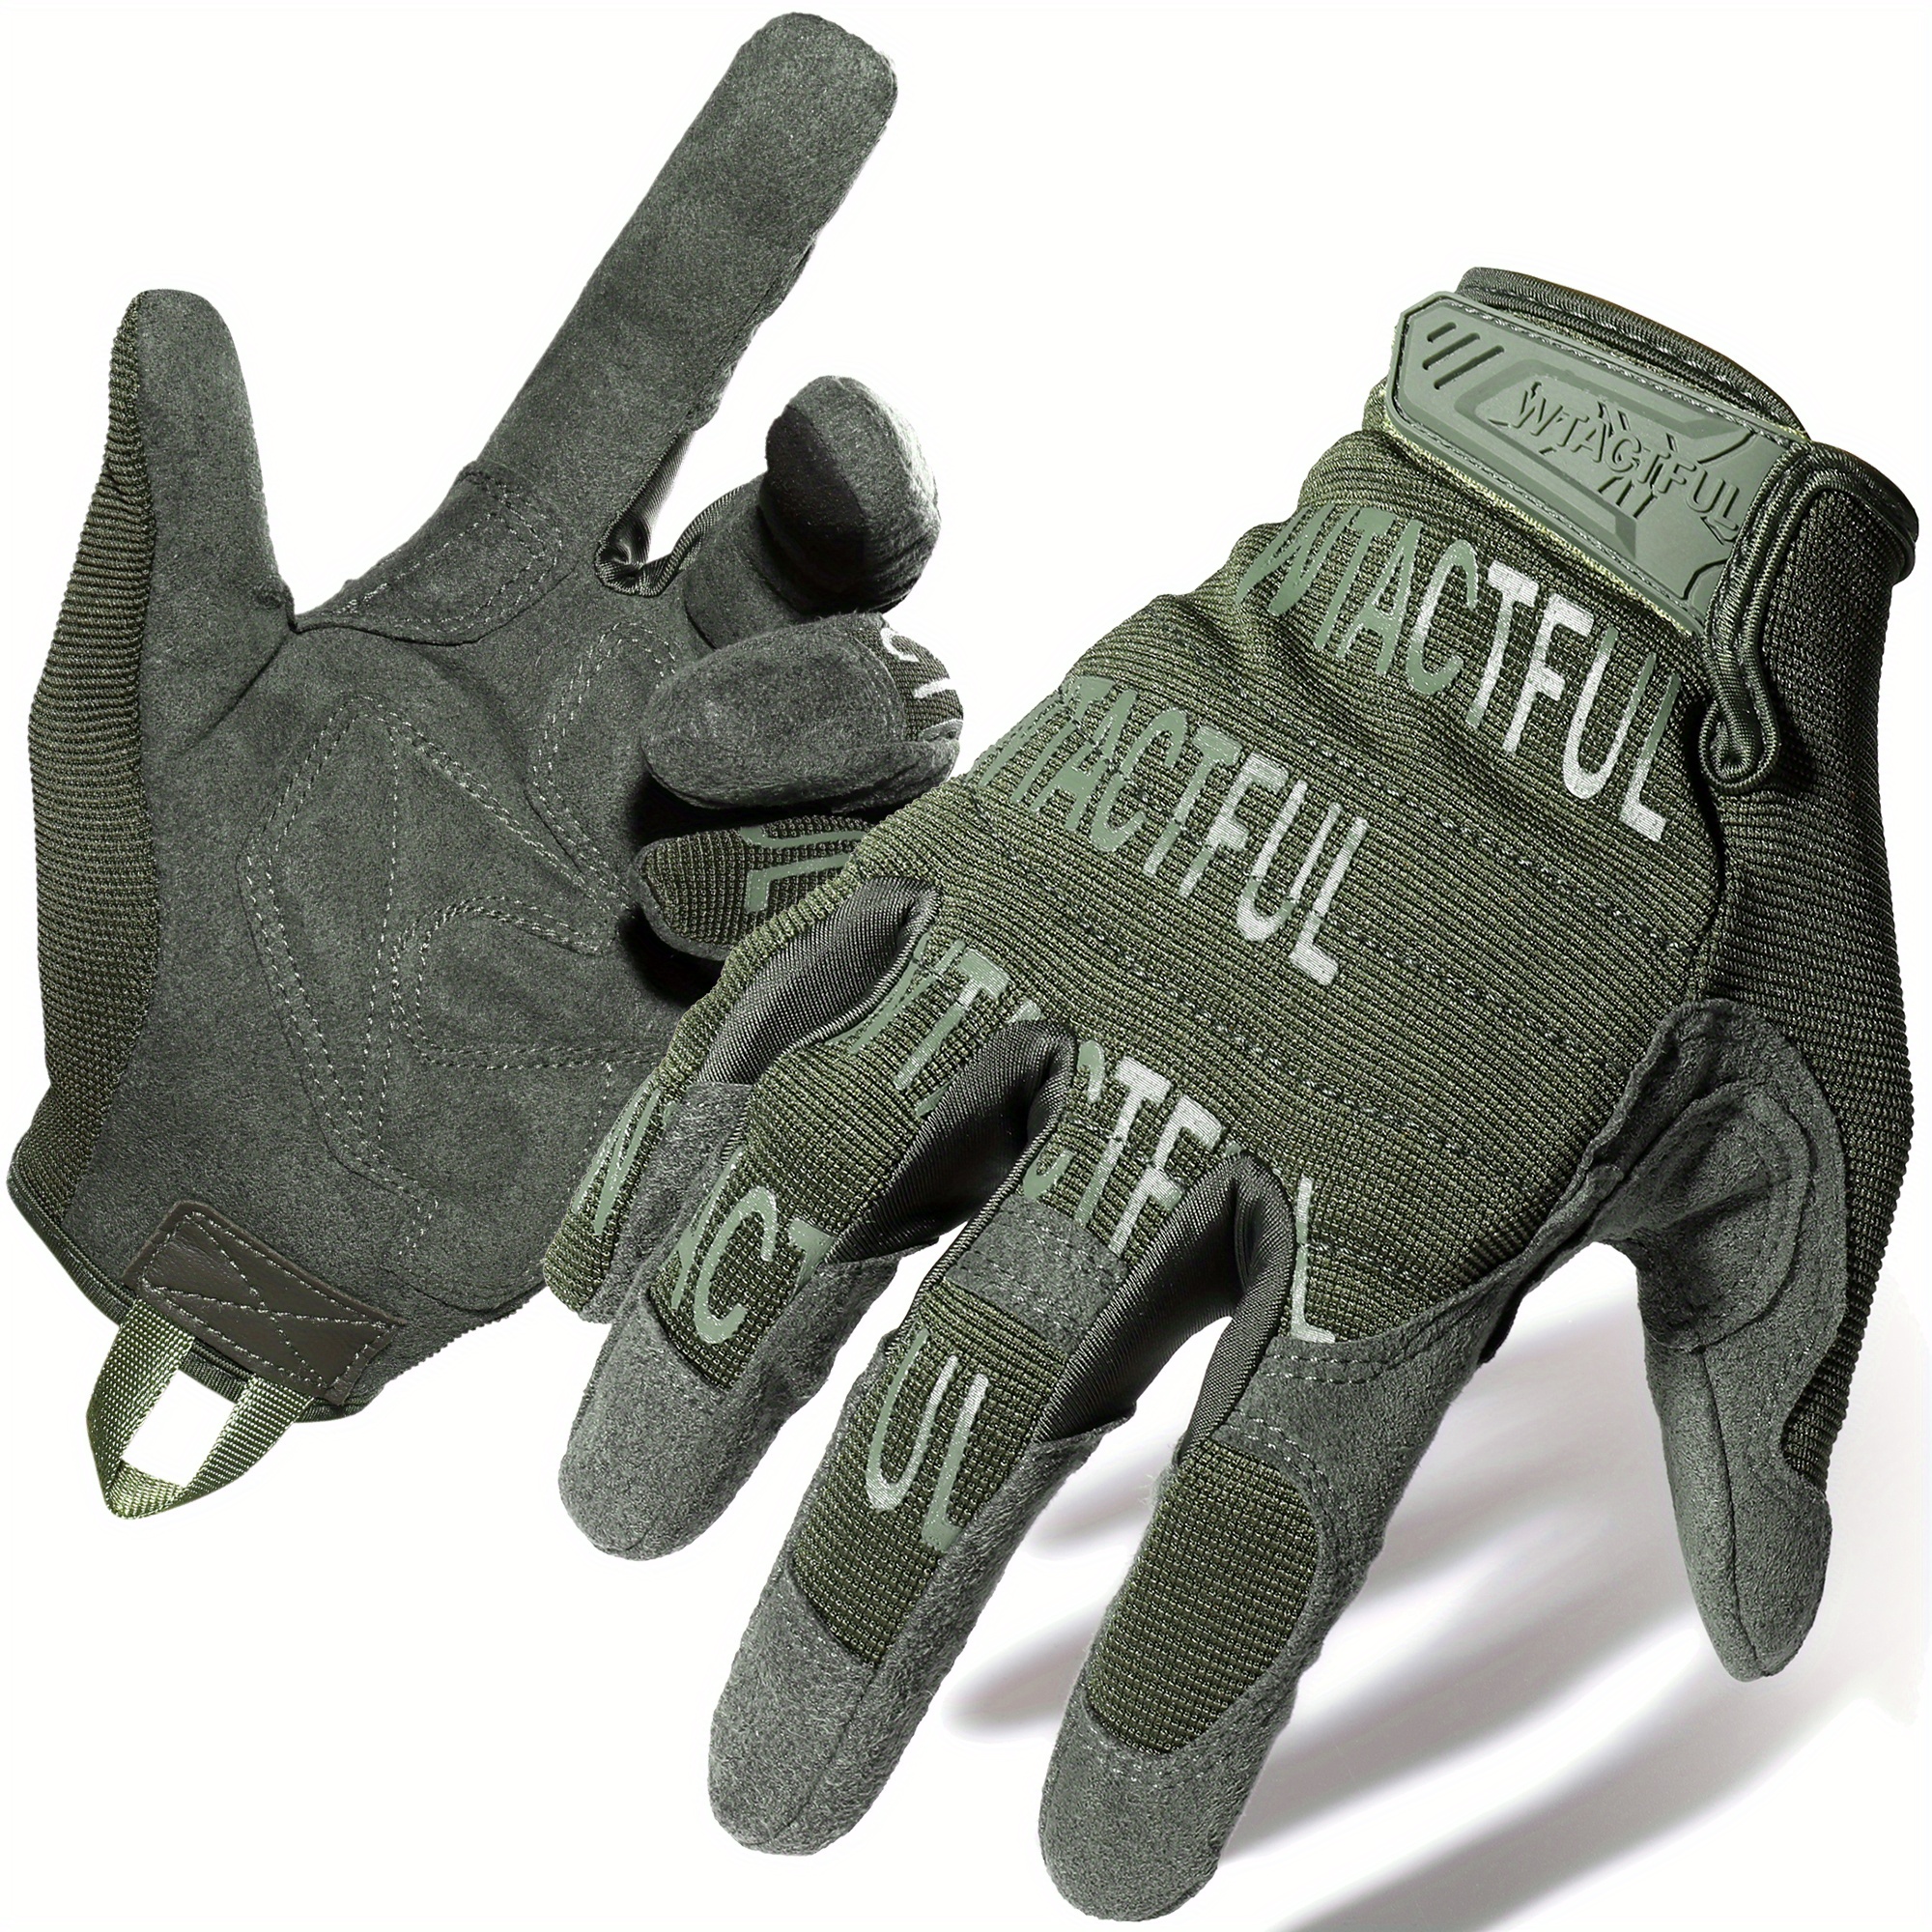 Guantes Tacticos Completos Airsoft Deportes Paintball GT15 